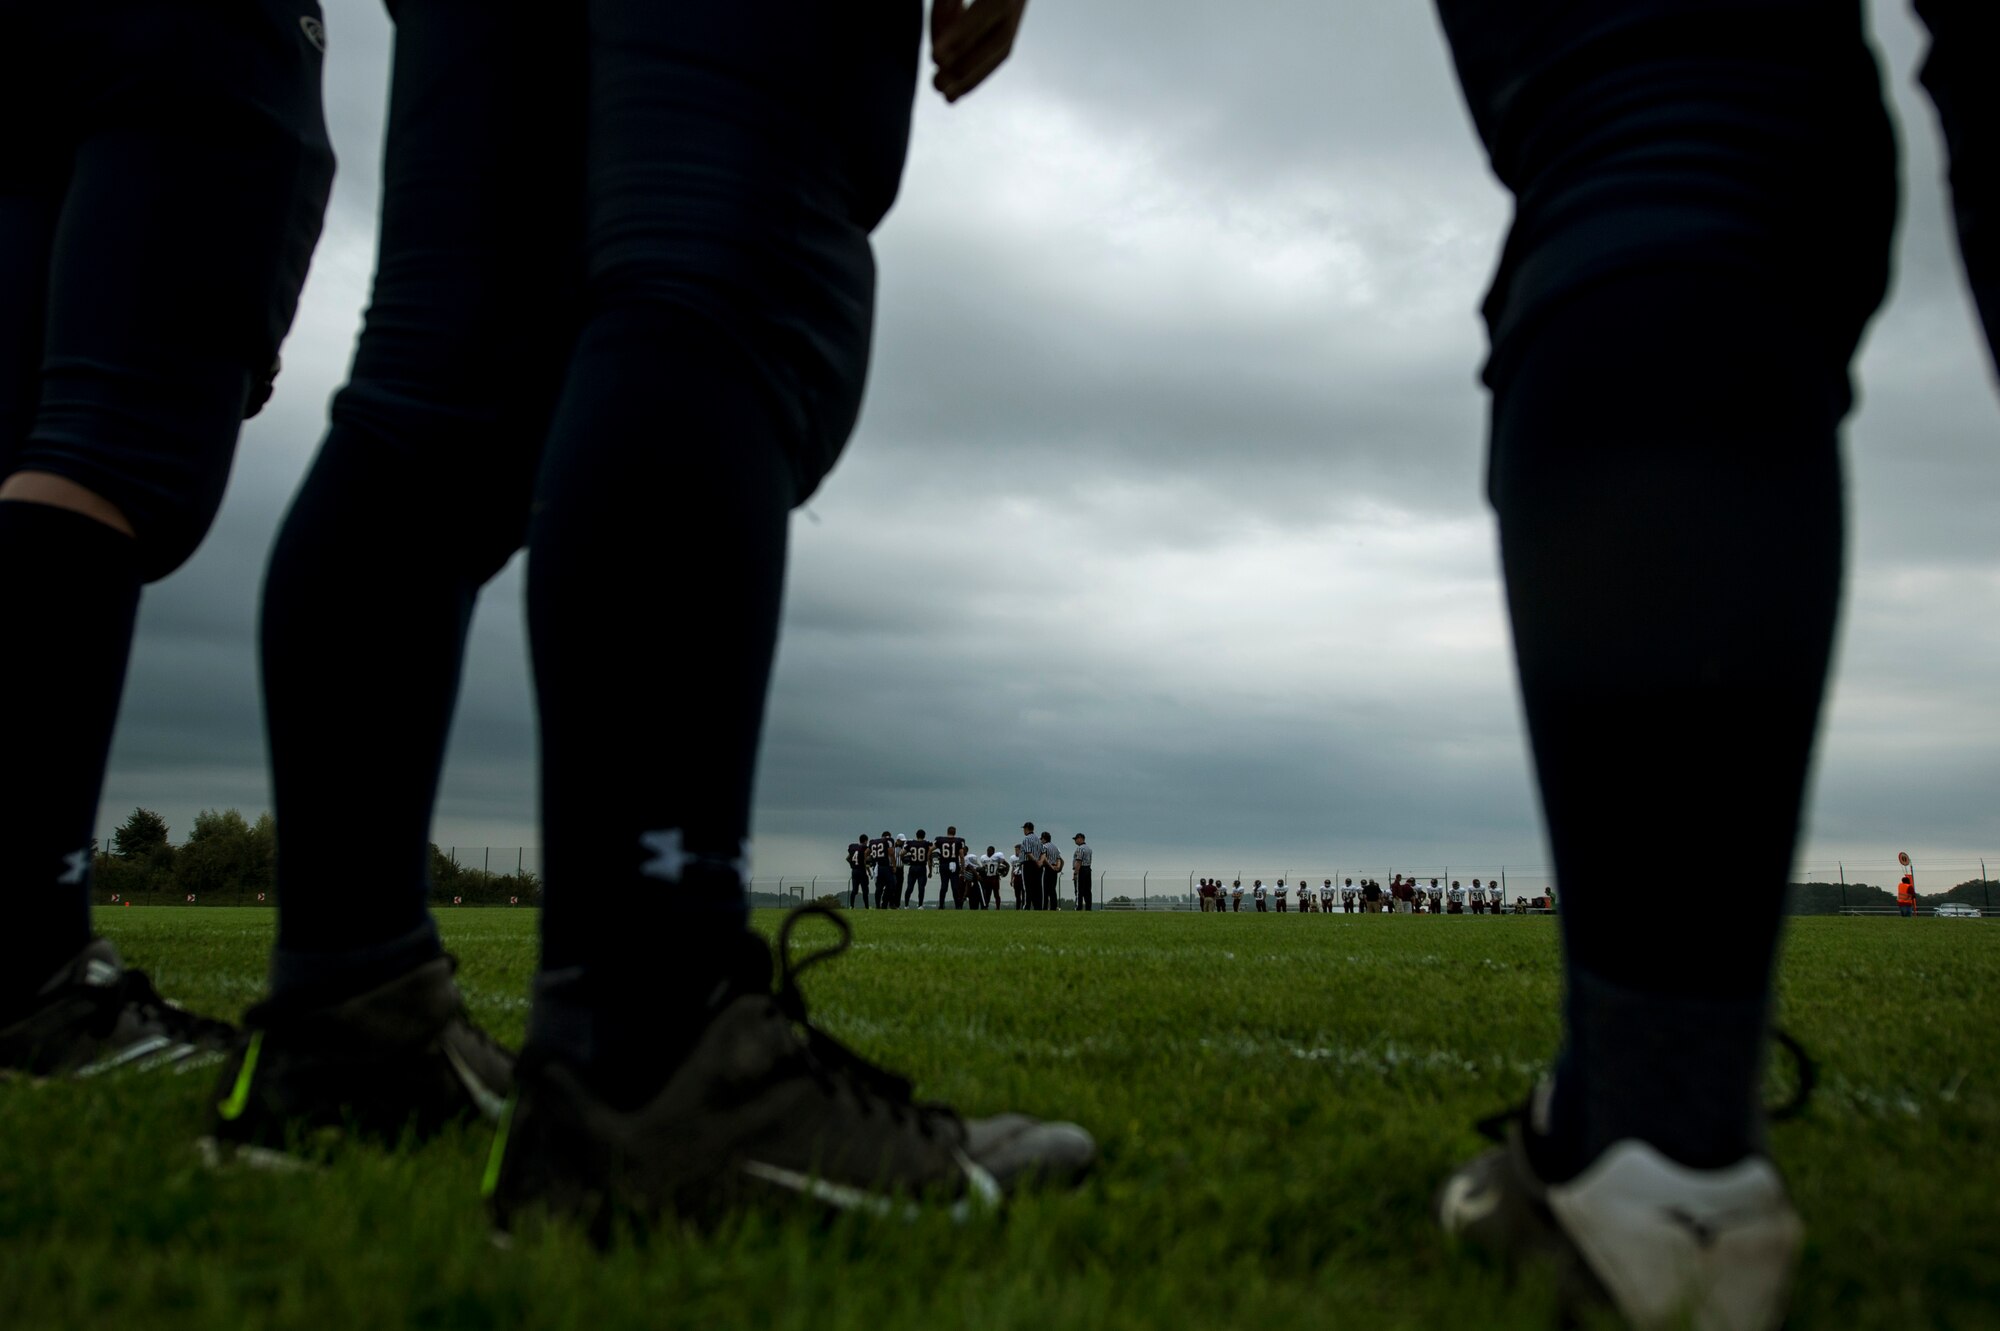 Bitburg Barons football team captains participate in the coin toss prior to the start of their game against the Baumholder Buccaneers Sept. 6, 2014, at Bitburg Annex, Germany. The game kicked off the 2014 season for the Barons. (U.S. Air Force photo by Senior Airman Rusty Frank/Released)